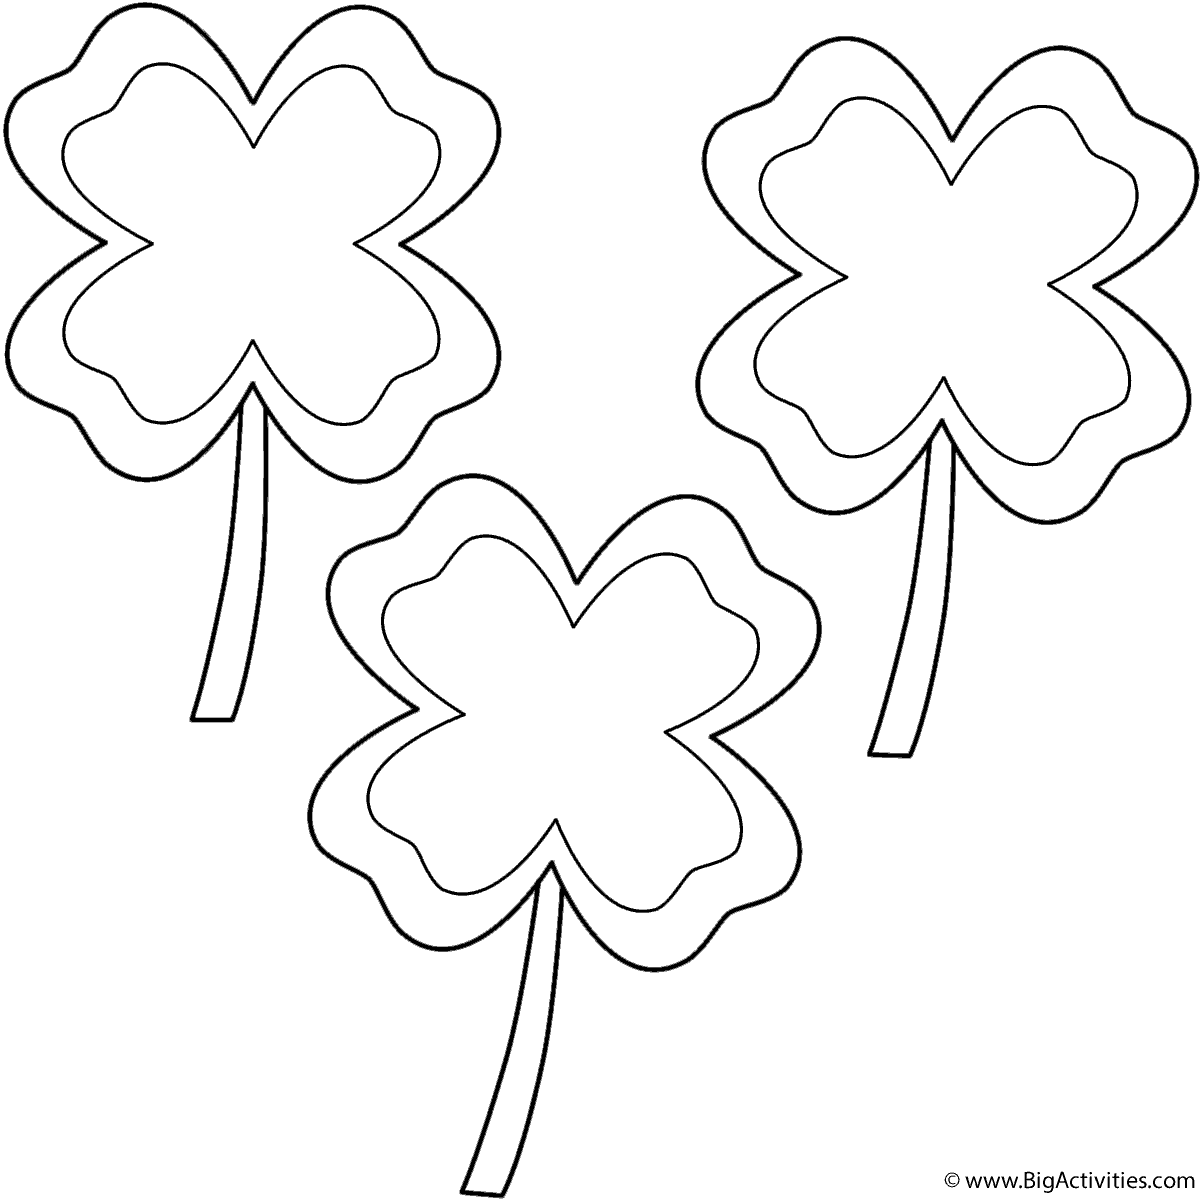 Four Leaf Clovers with border (3 clovers) - Coloring Page (St. Patrick ...